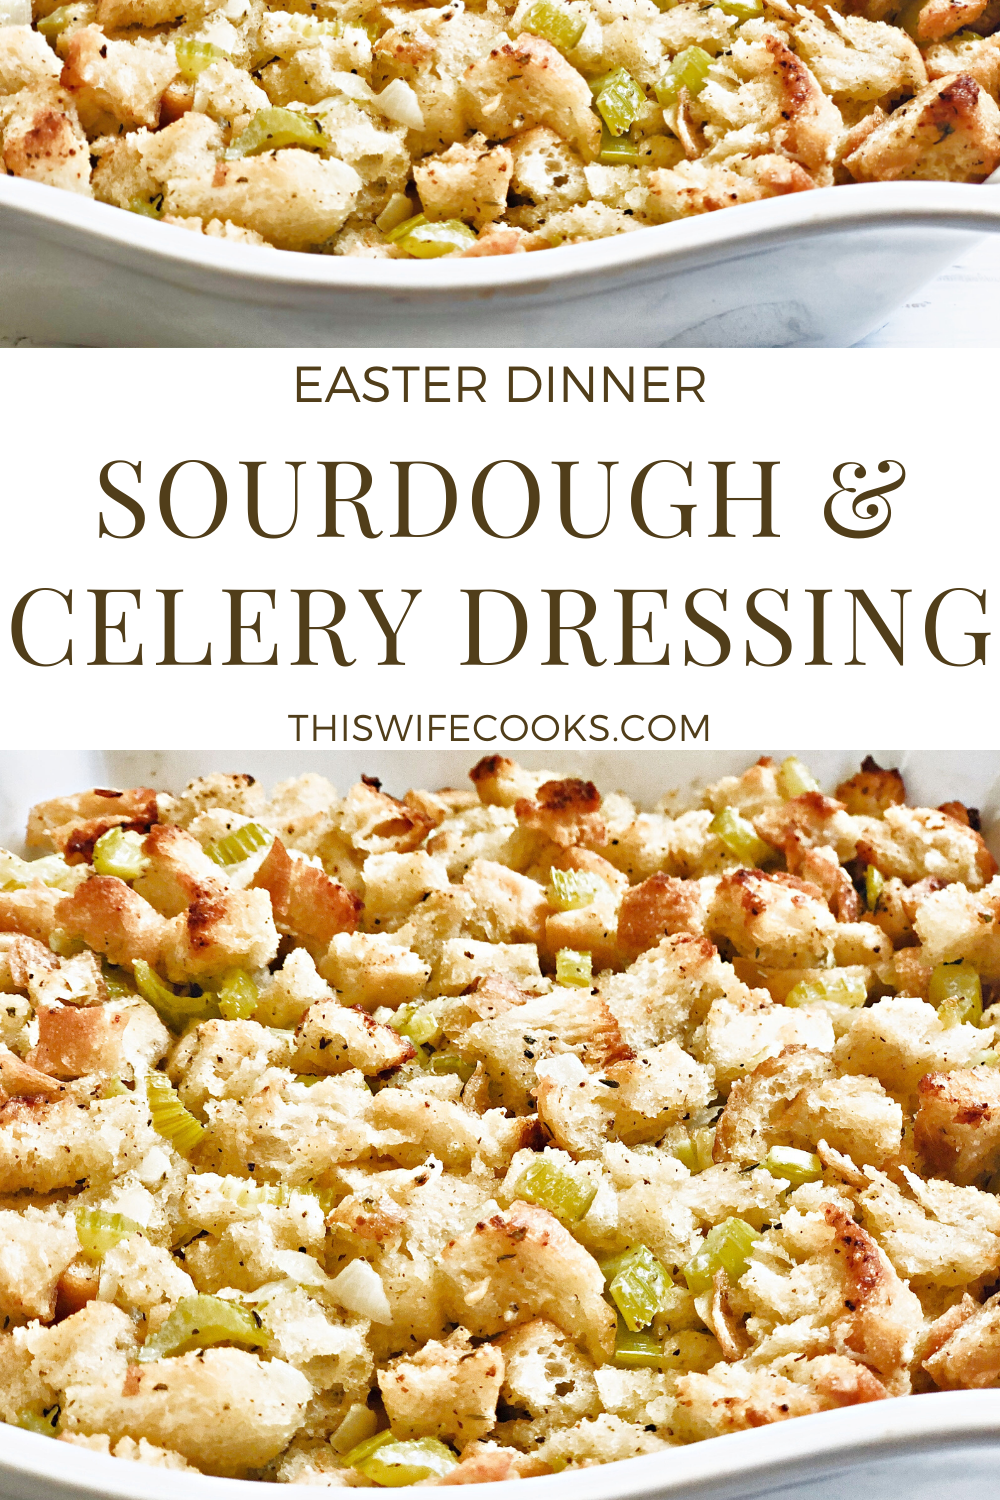 Sourdough and Celery Dressing - A hearty and savory baked casserole dressing that is easy to make and perfect for the holiday table!

#sourdoughdressingrecipe #classicthanksgivingdressing #veganthanksgivingrecipes #pantbasedthanksgiving #veganeasterrecipes #veganbrunchrecipes #plantbaseddinnerideas #thiswifecooksrecipes #breadstuffing via @thiswifecooks